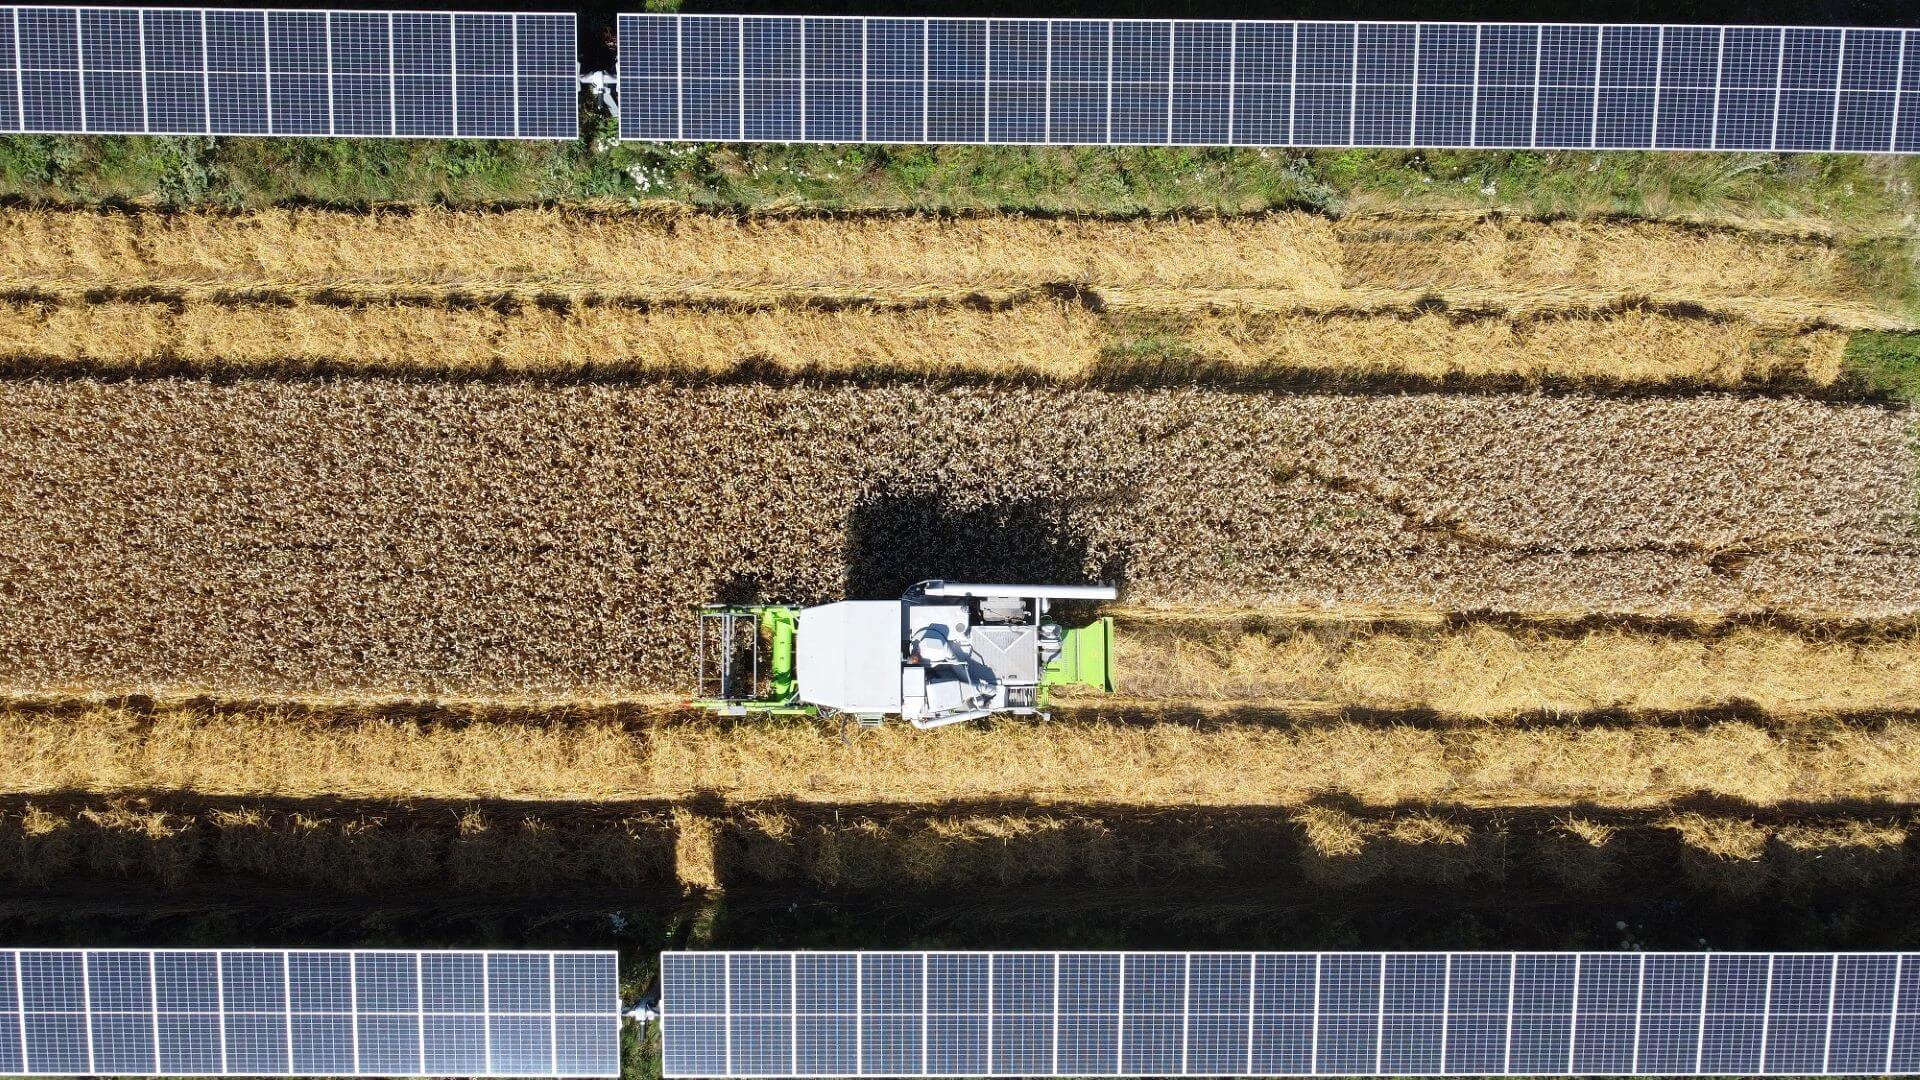 Aerial bird's eye view of a combine harvester gathering crops between rows of solar panels